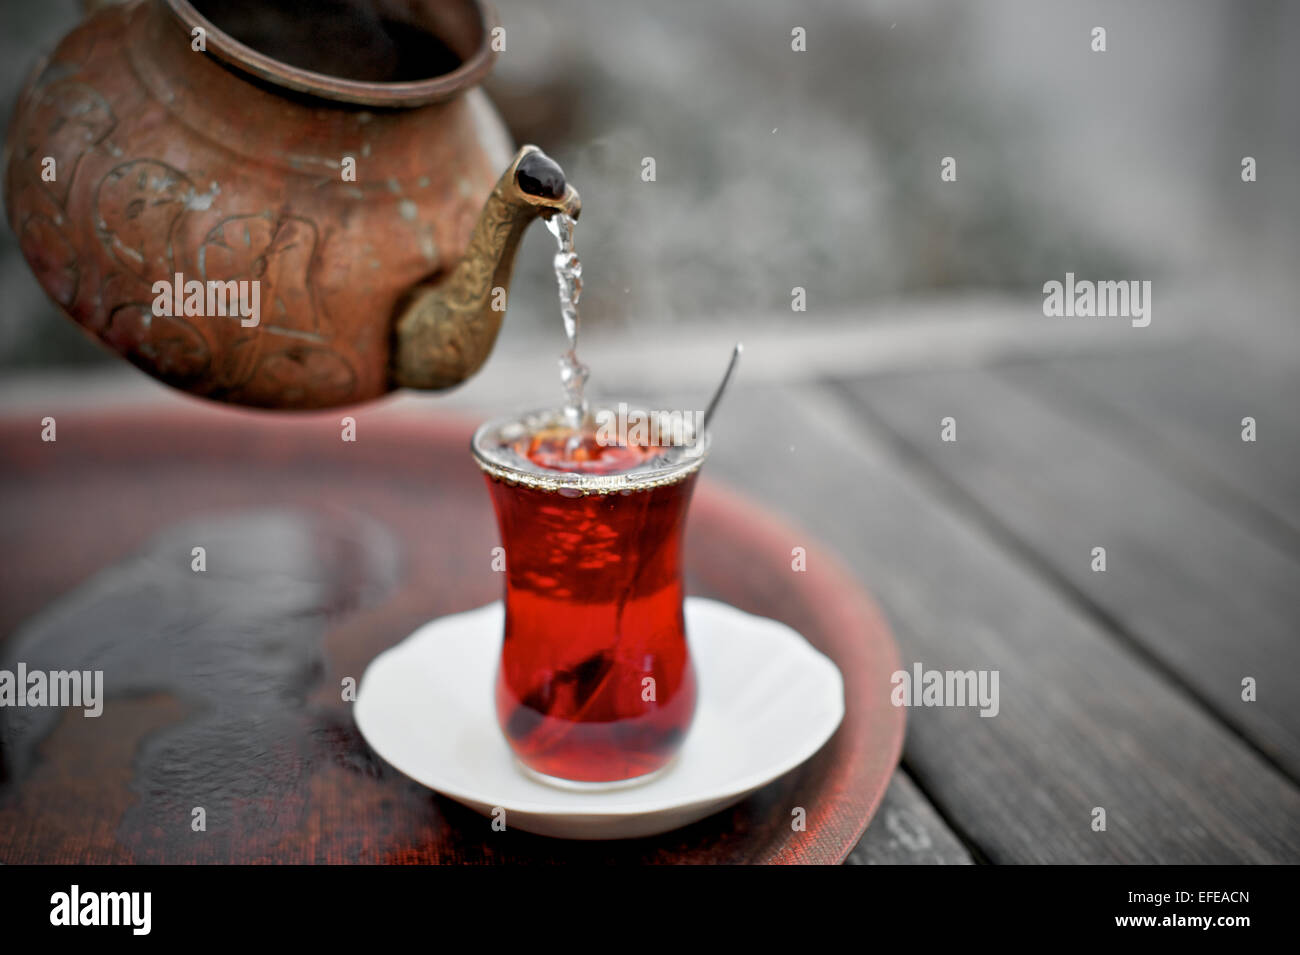 Turkish tea being poured in an outdoor cafe is pictured as part of a photo essay on winter breaks in Istanbul, Turkey. Stock Photo